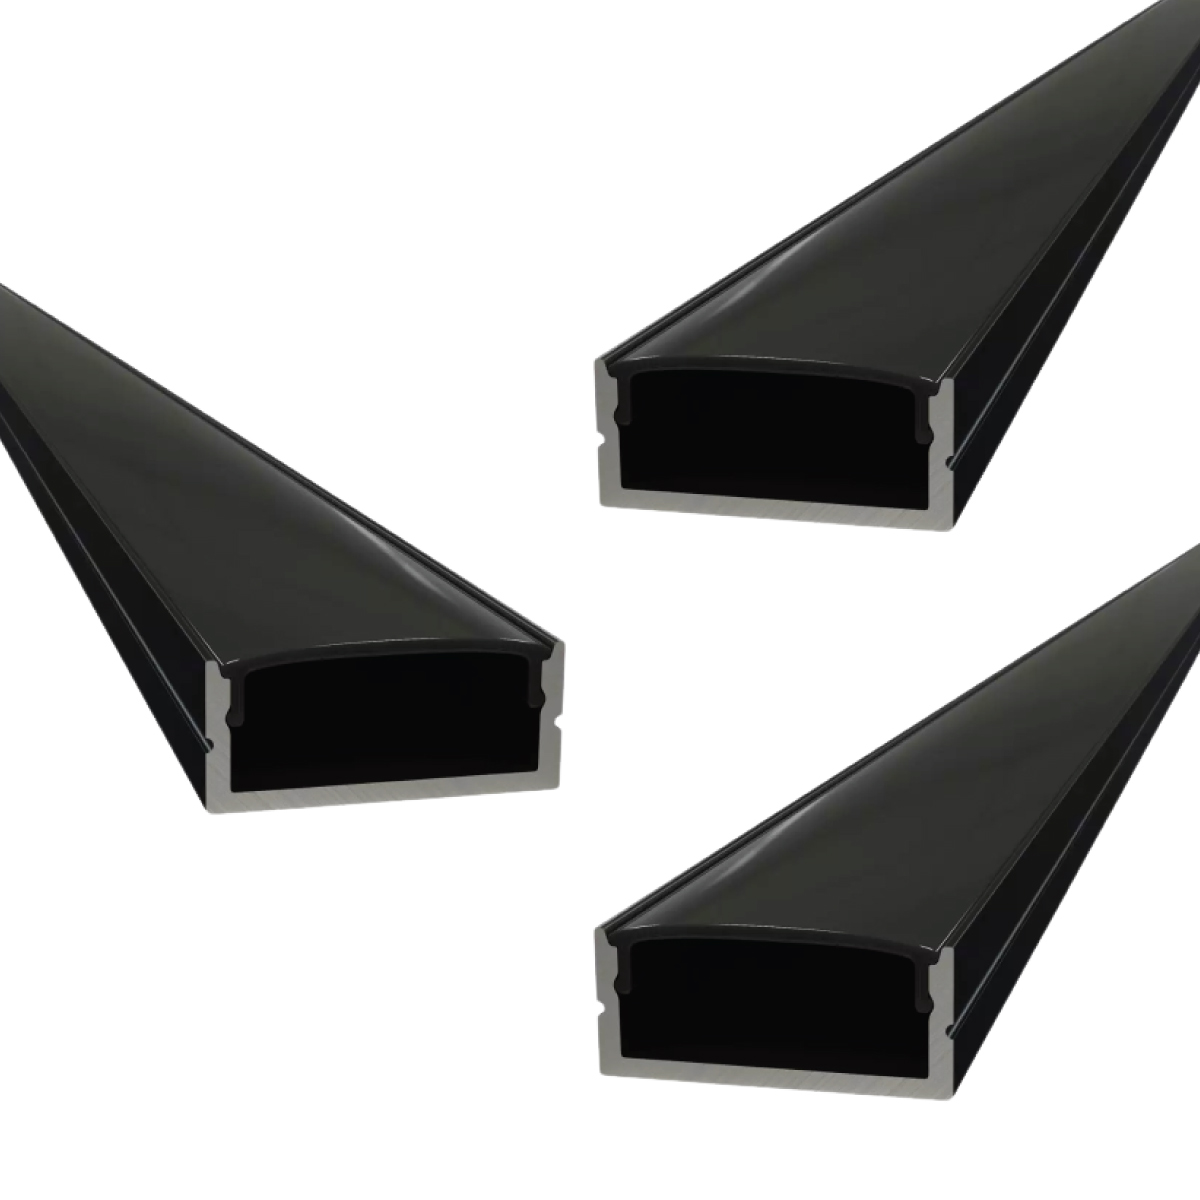 View Pack of 3 Black Aluminium Surface Mounted Profiles 2m Long With Cover End Caps information